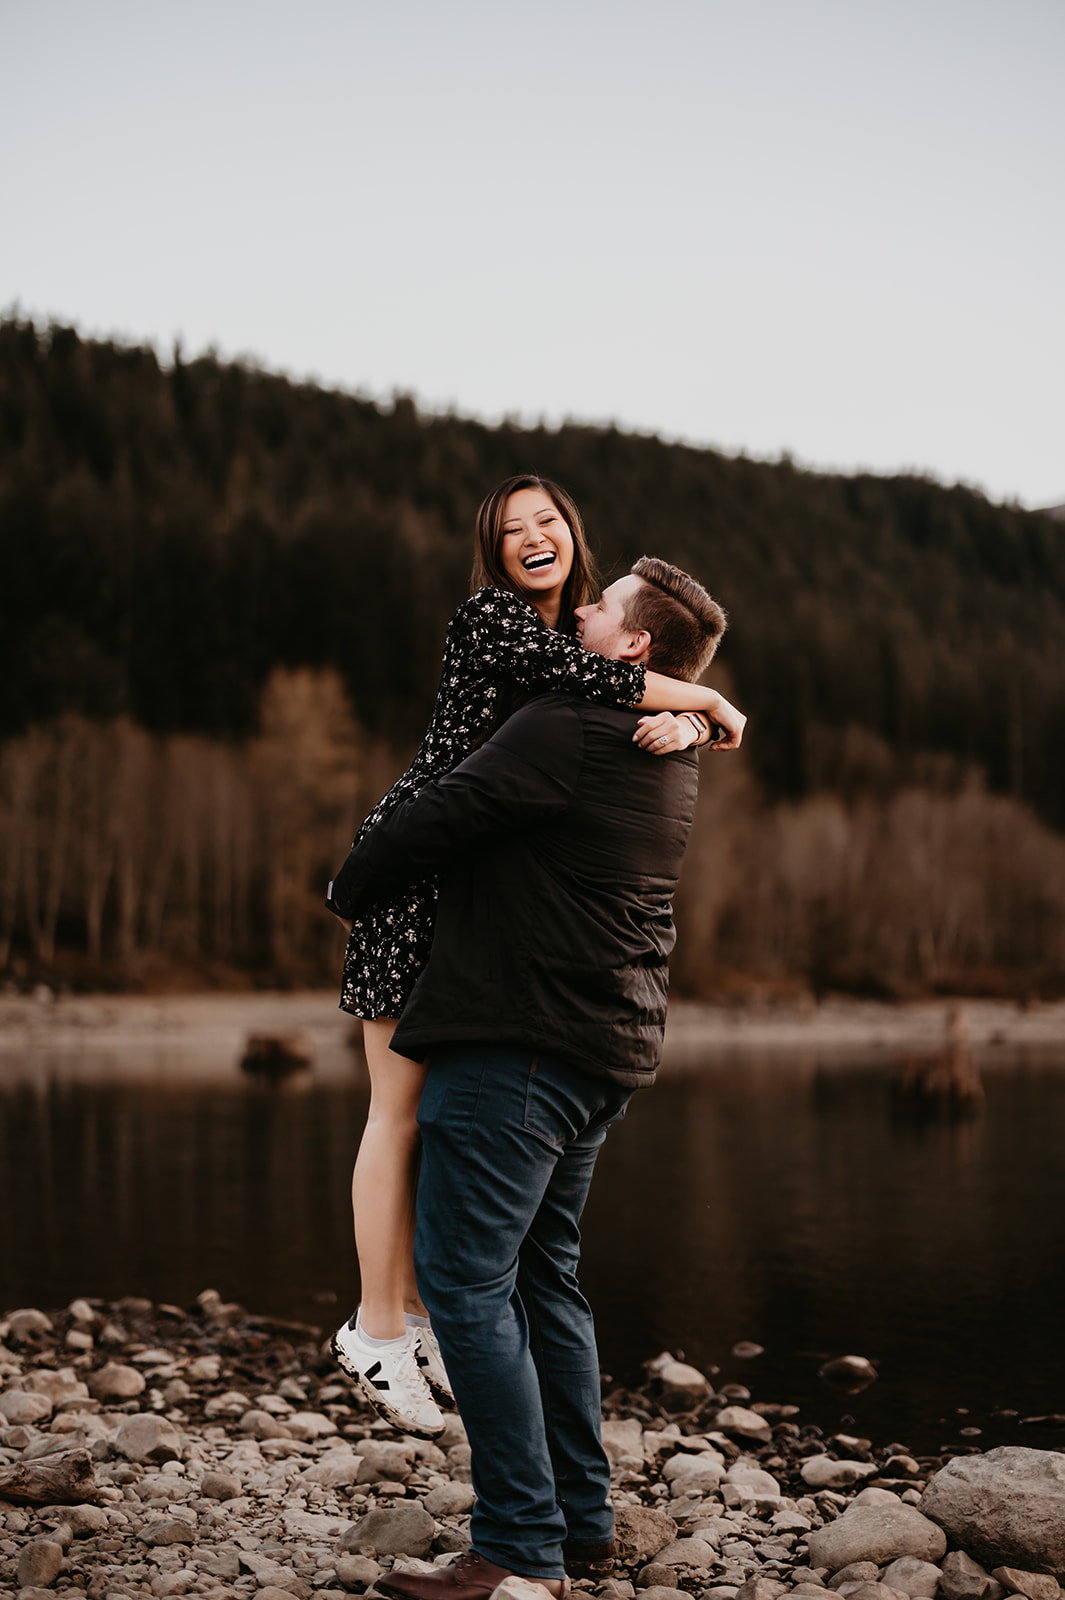 Magical sunset moment shared by the lake during engagement session